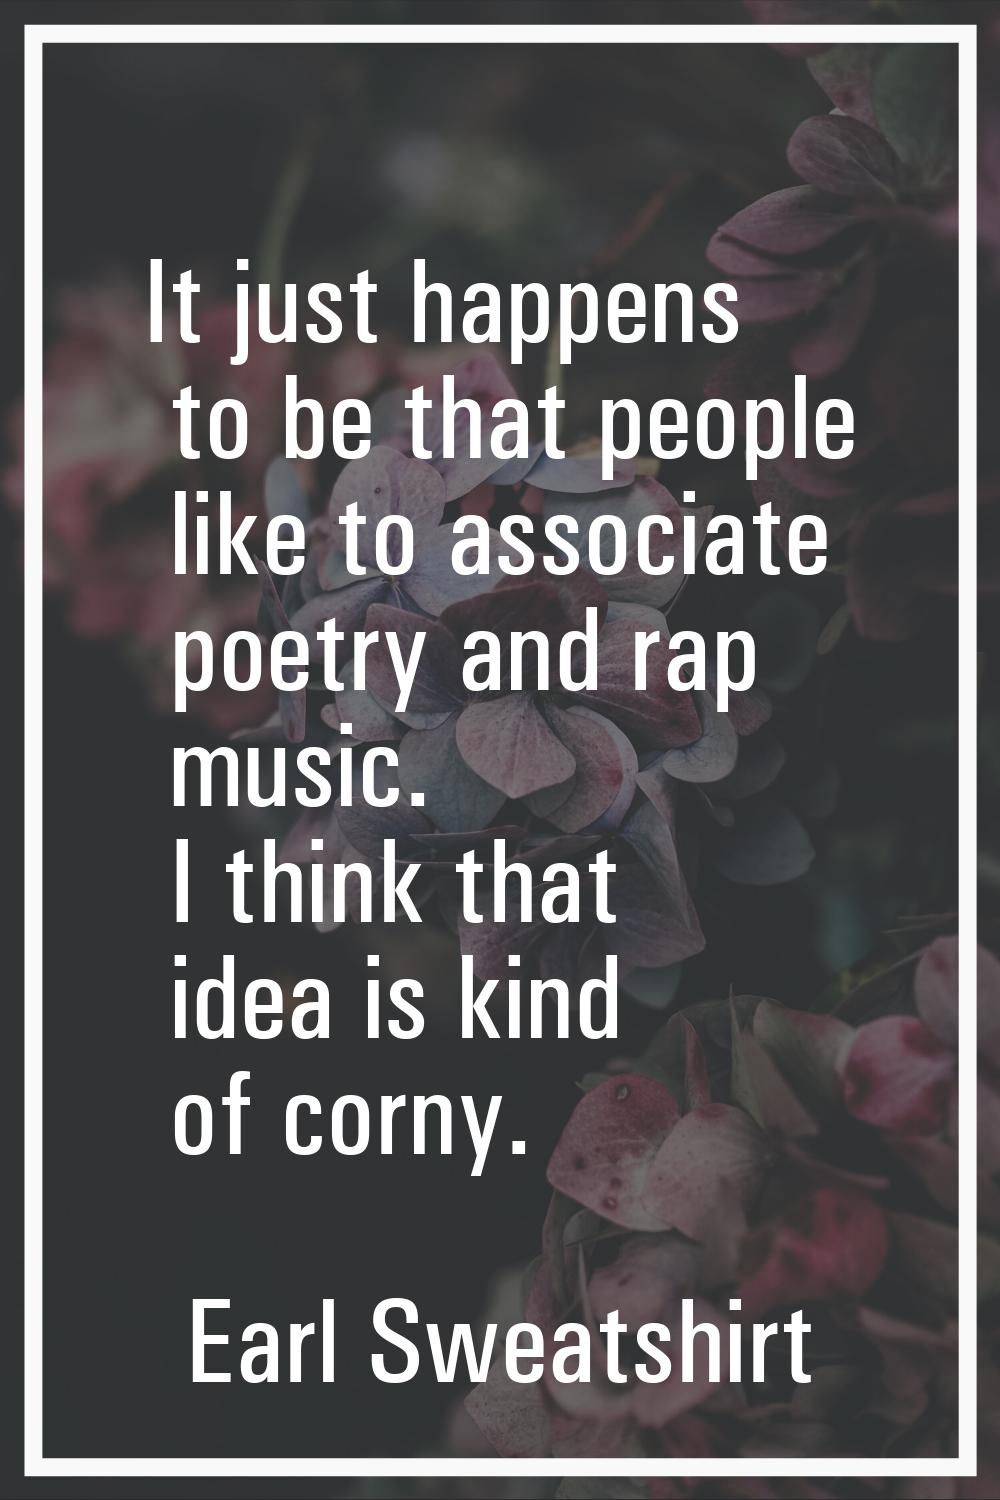 It just happens to be that people like to associate poetry and rap music. I think that idea is kind